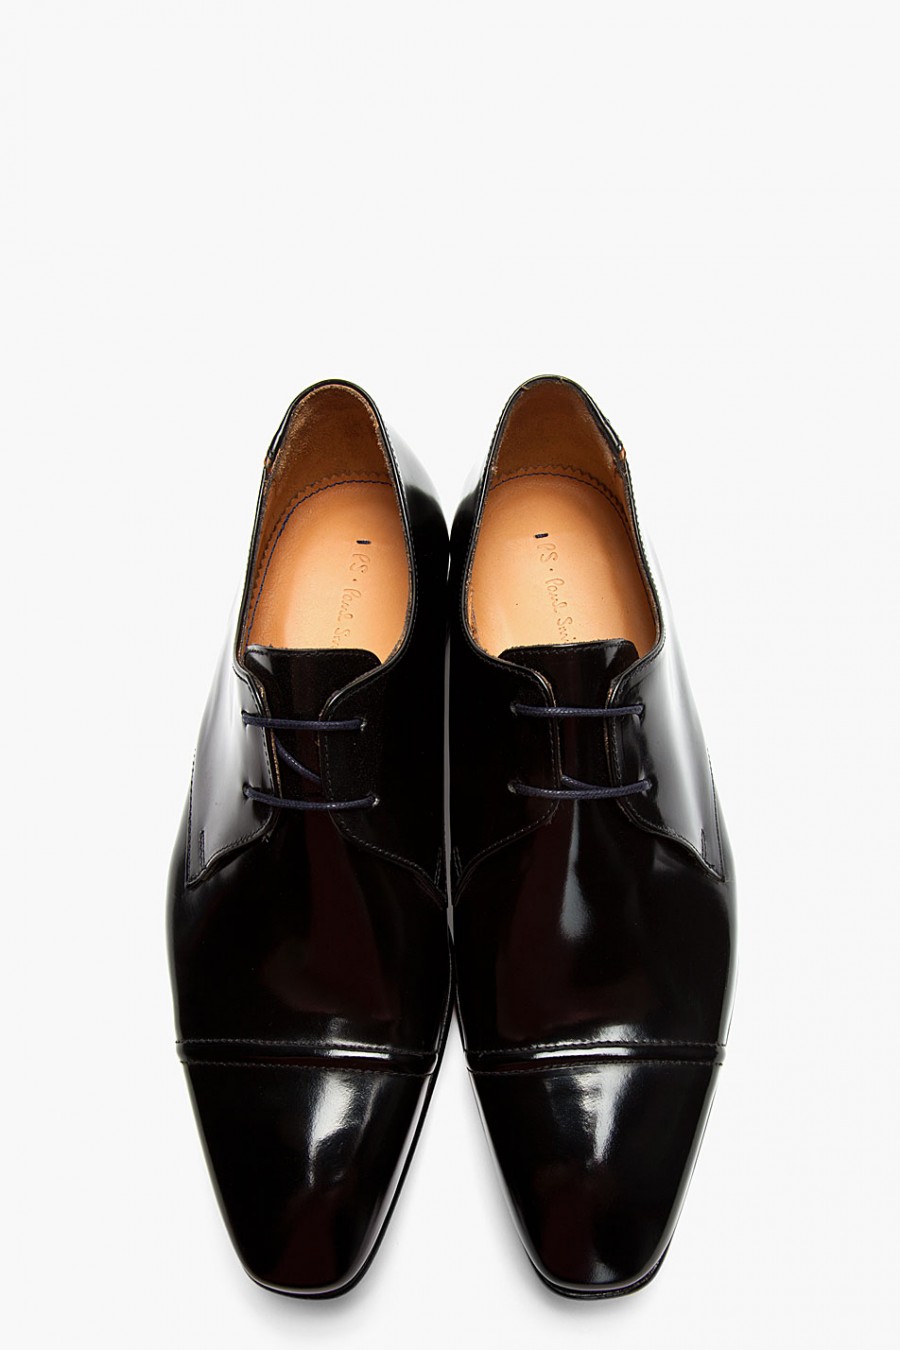 Dress to Impress: Black Patent Leather Shoes | SOLETOPIA